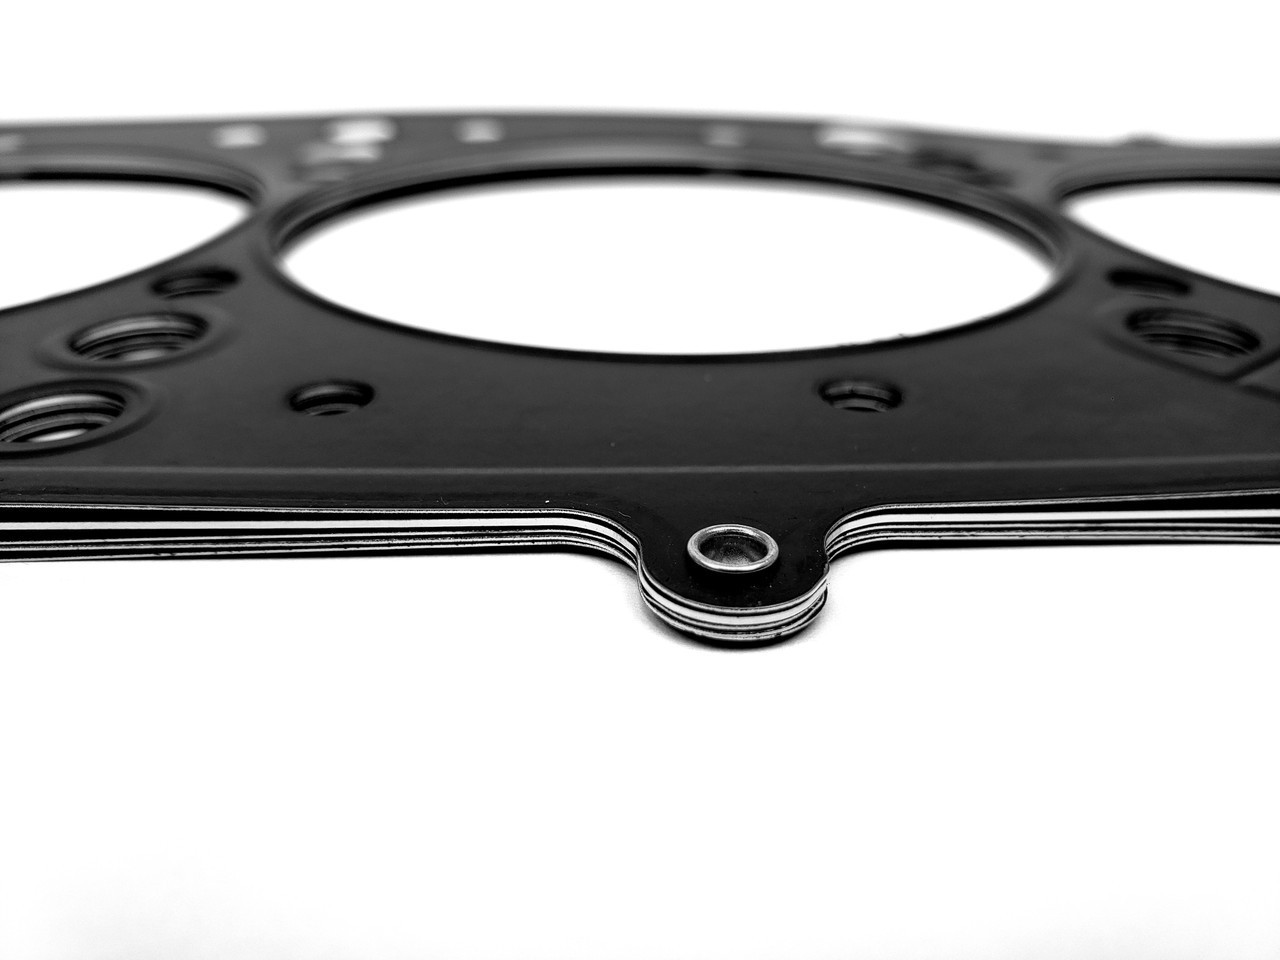 Head Gasket by Cleveland brand (made by Cometic in the USA)
High-Performance Multi-Layer Steel (MLS) design
FIAT 124 Spider, Spider 2000 and Pininfarina - 1974-1985 (1756 and 1995cc)
FIAT 124 Sport Coupe - 1974-1975
 - Auto Ricambi
4387624, GA3-405-Z